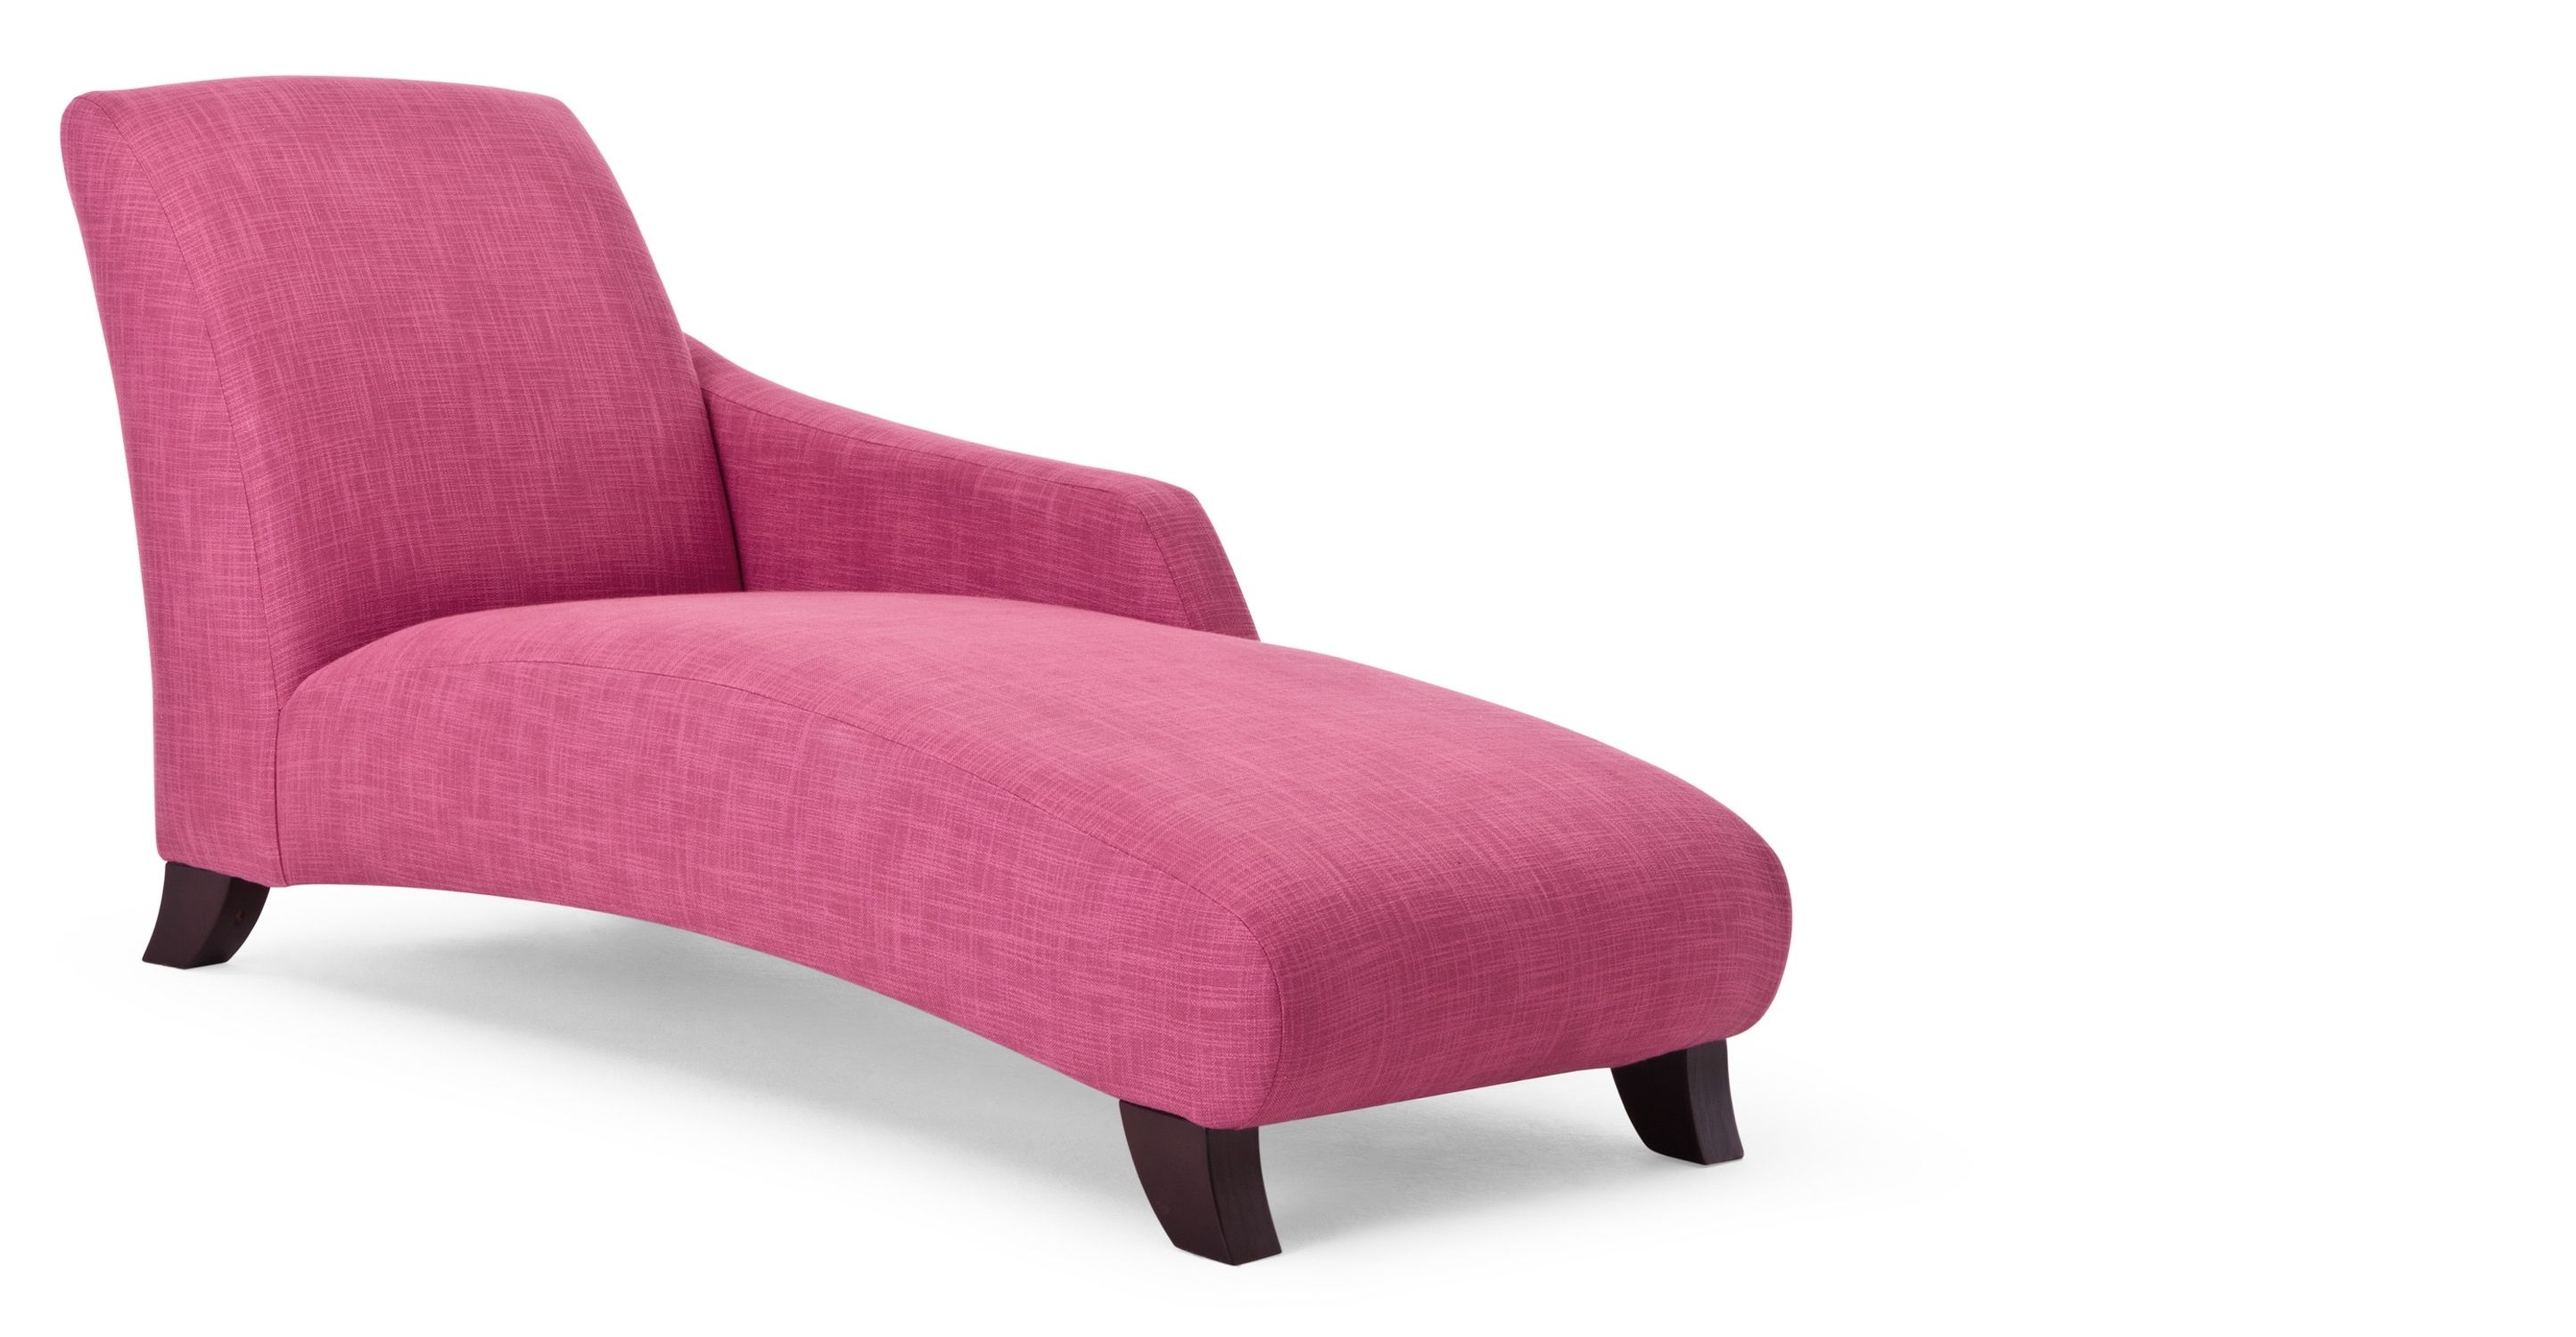 Pink Chaise Lounge Chairs • Lounge Chairs Ideas Regarding Trendy Hot Pink Chaise Lounge Chairs (View 2 of 15)